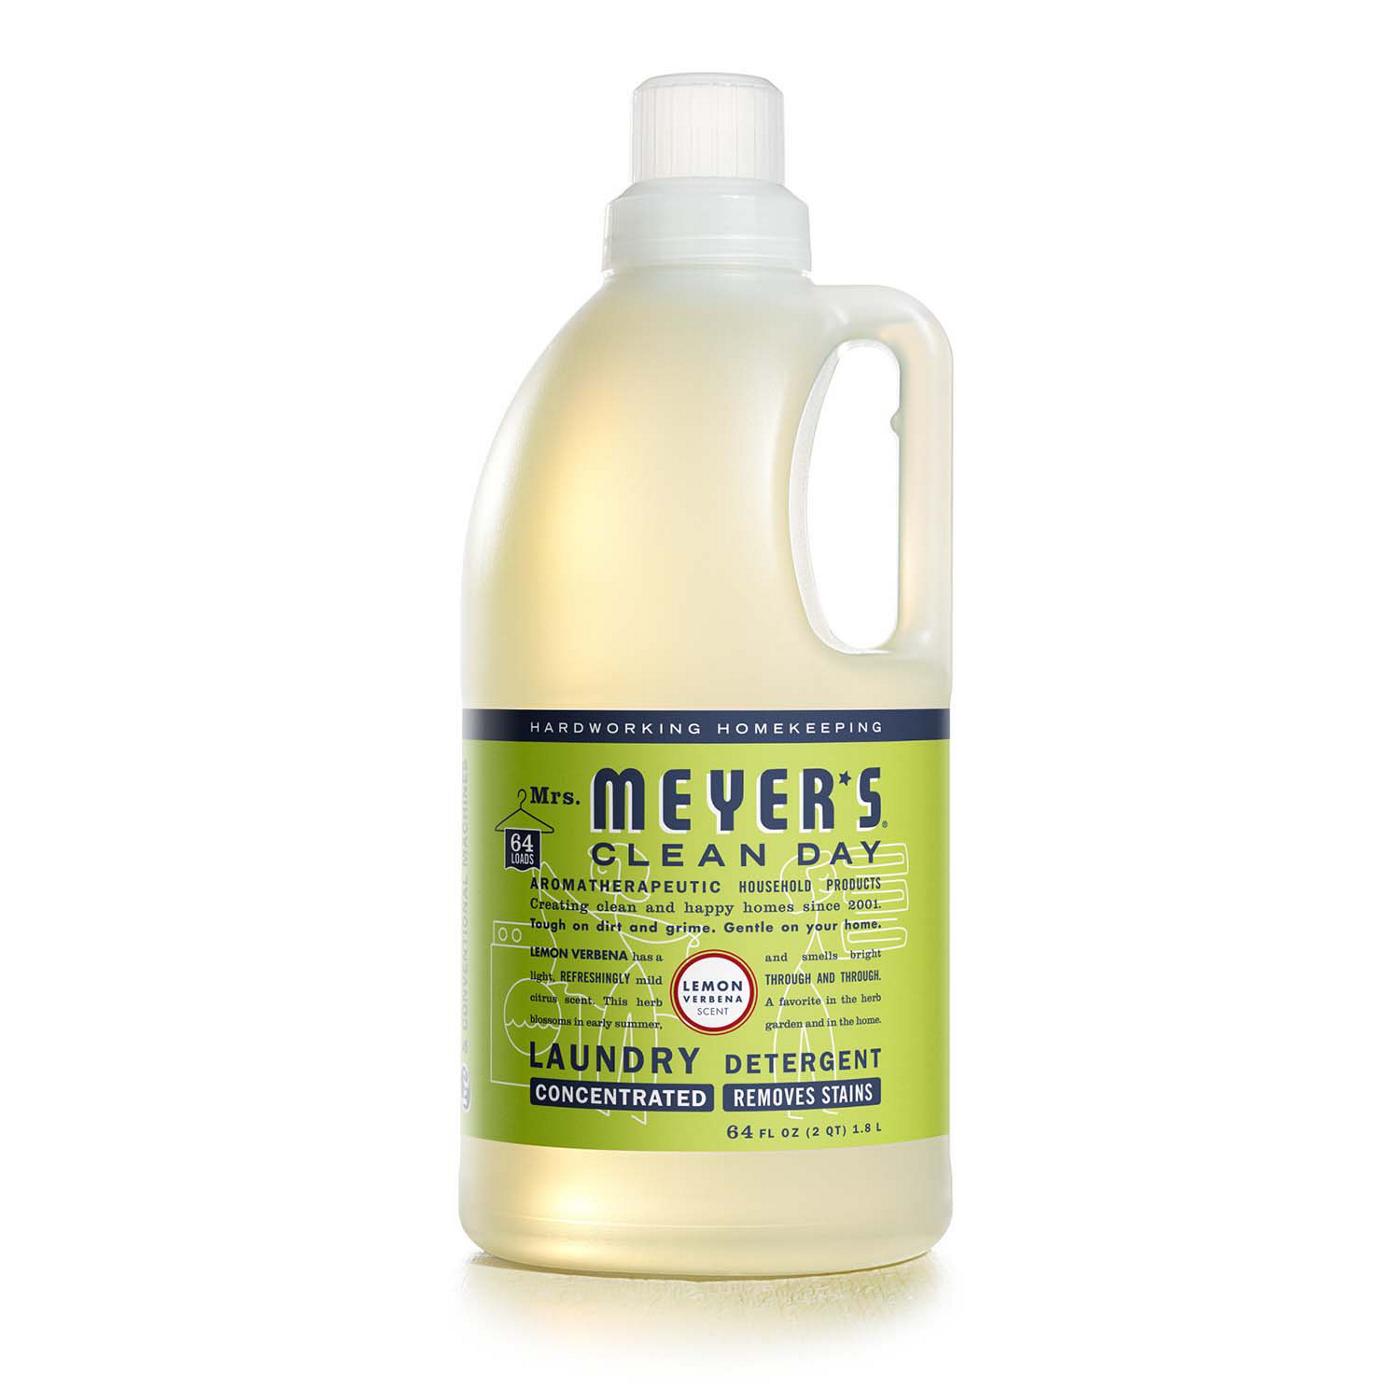 Mrs. Meyer's Clean Day Lemon Verbena Scent Concentrated Laundry Detergent, 64 Loads; image 1 of 5